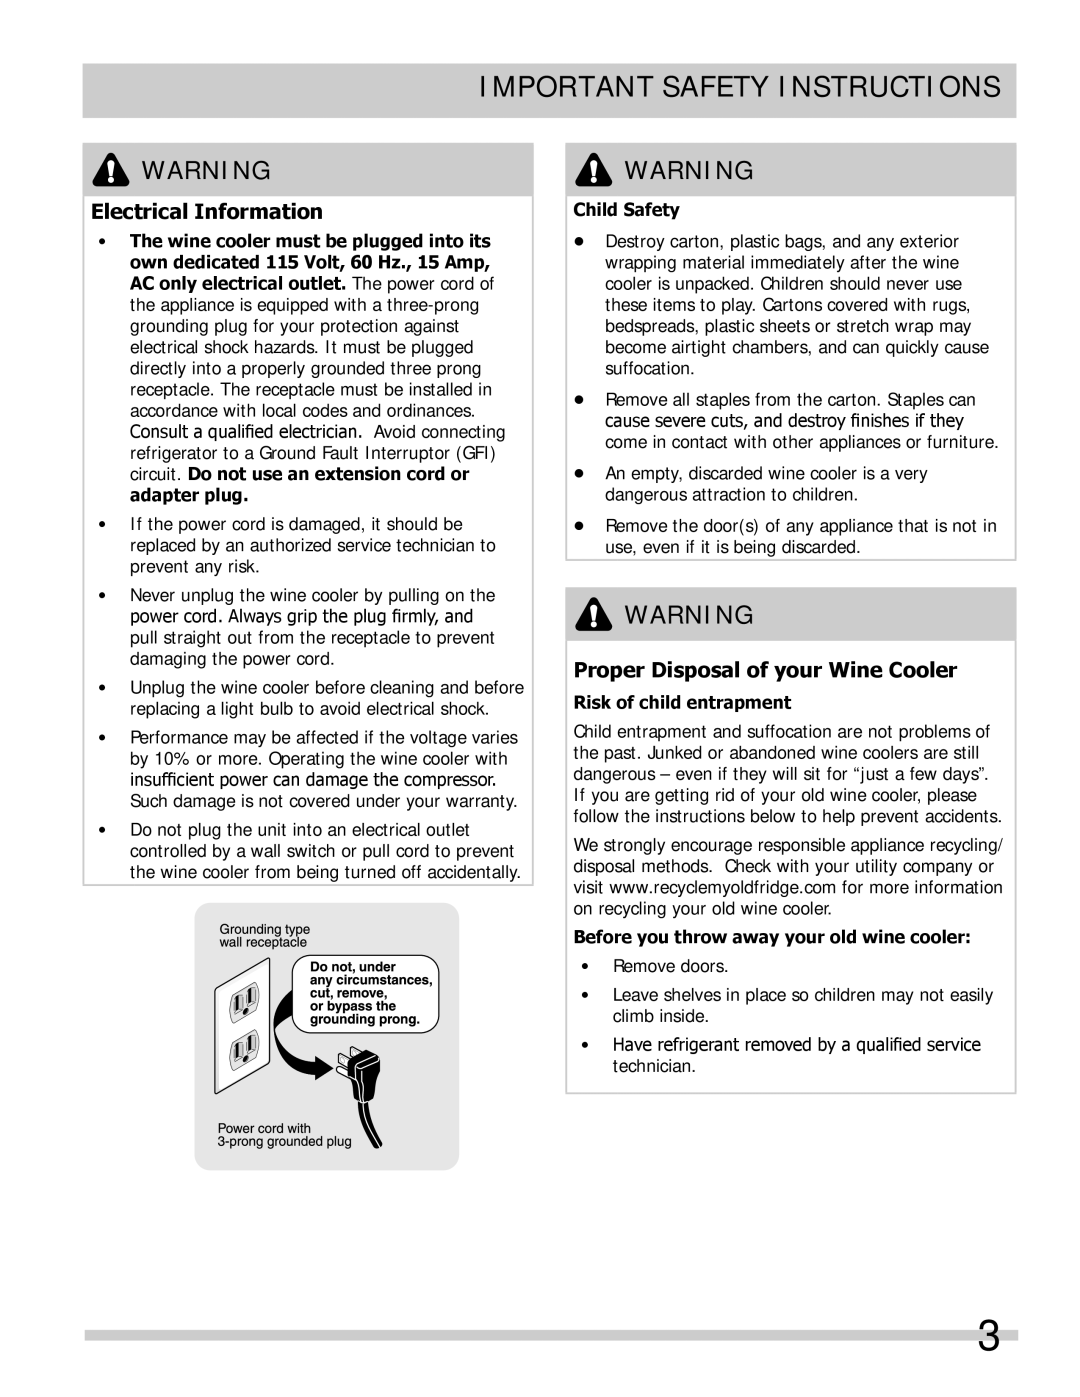 Frigidaire FFWC38F6LS Important Safety Instructions, Electrical Information, Proper Disposal of your Wine Cooler 